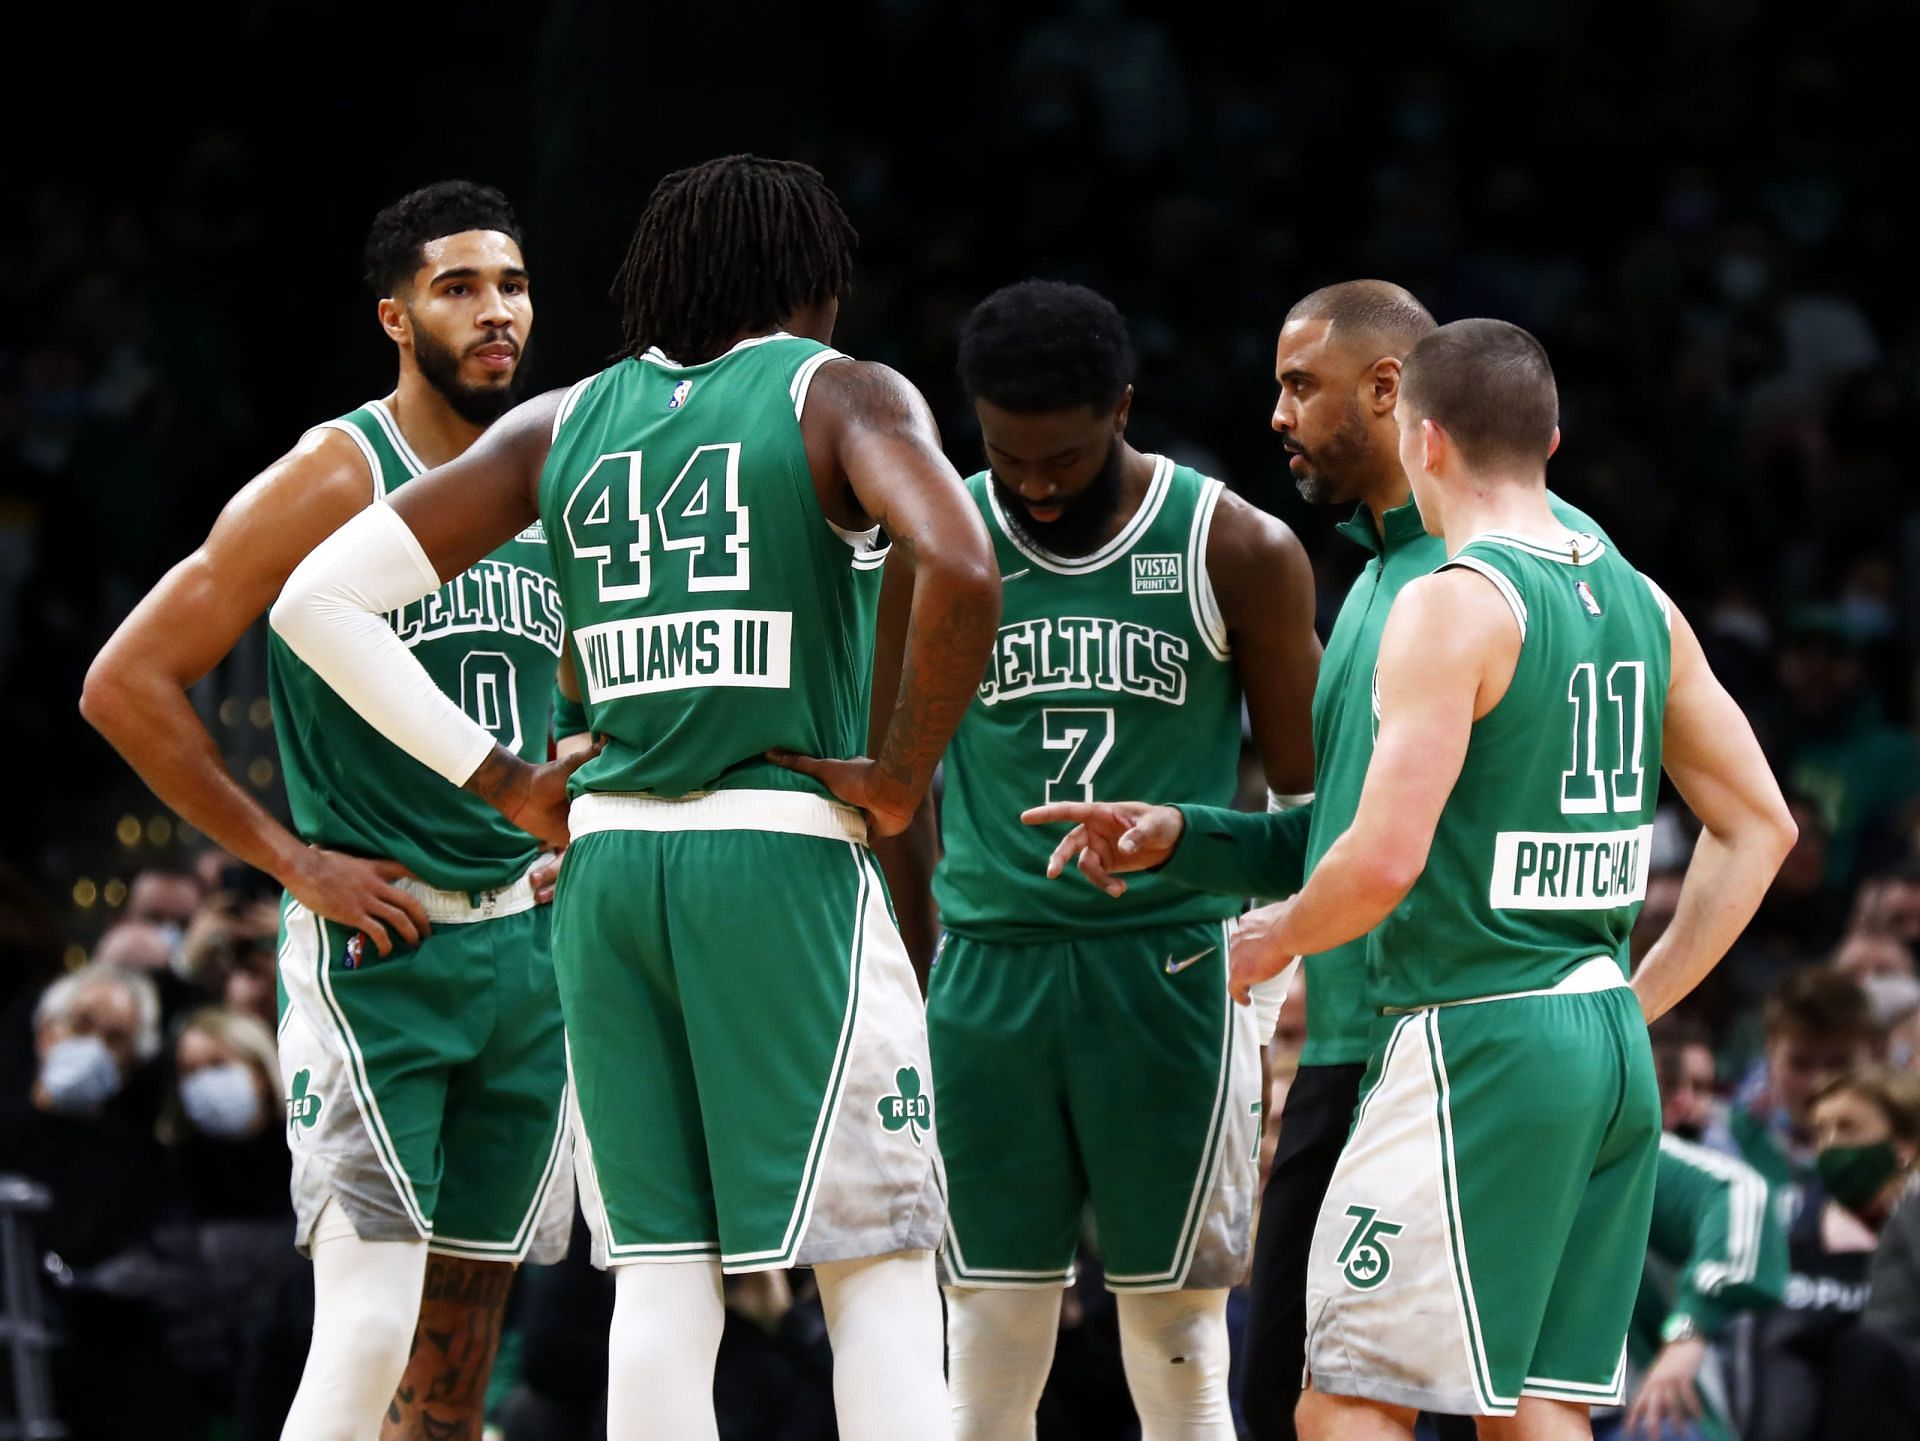 The Boston Celtics are still looking for conistency past the midway point of the season. [Photo: Chowder and Champions]